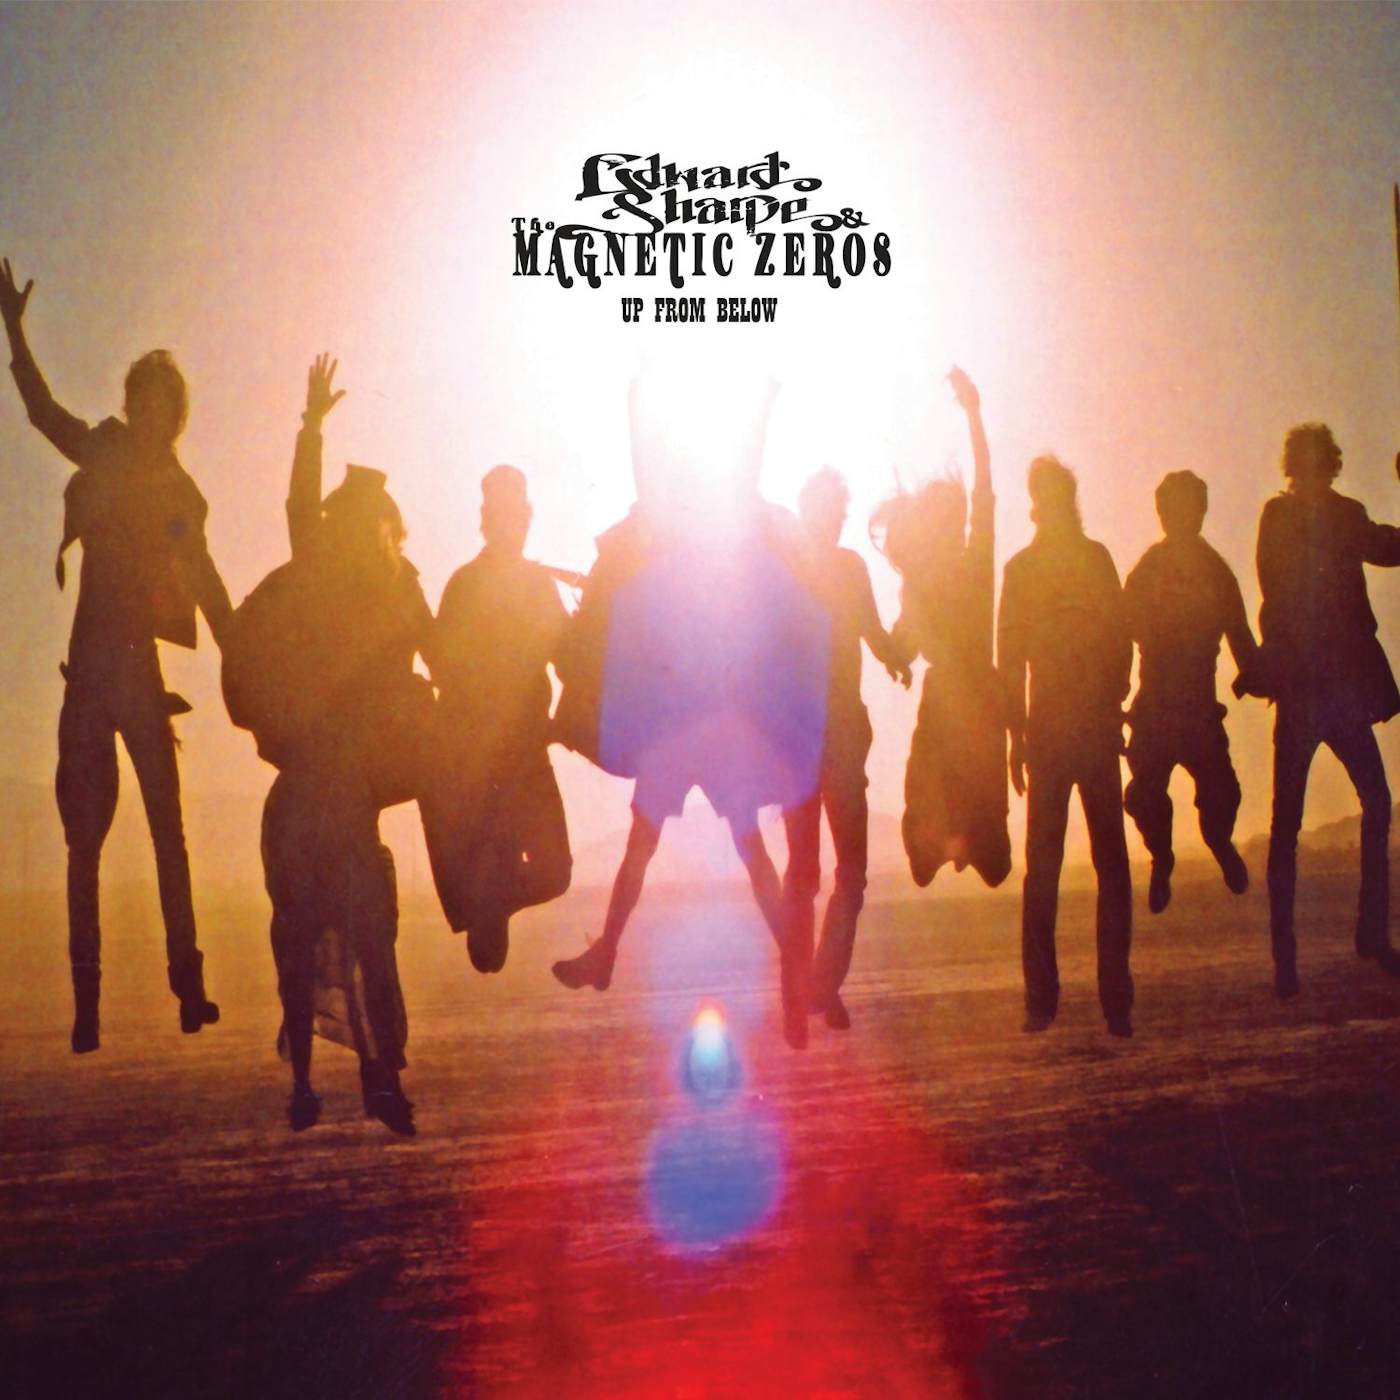 Edward Sharpe & The Magnetic Zeros Up from Below Vinyl Record